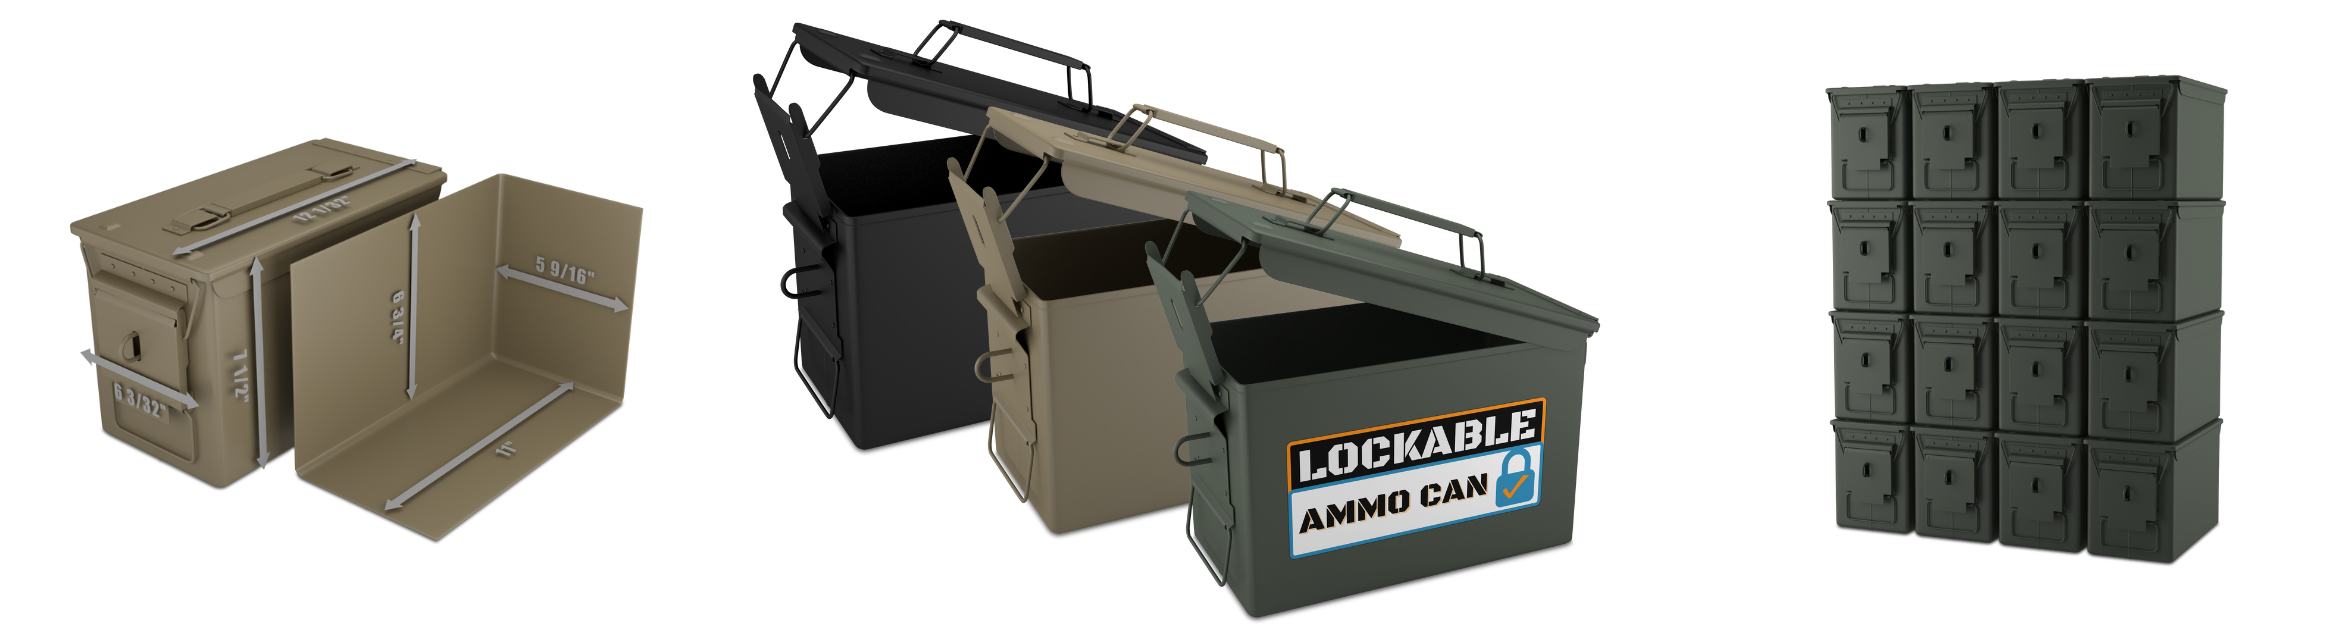 Ammo Can Website 2350x644